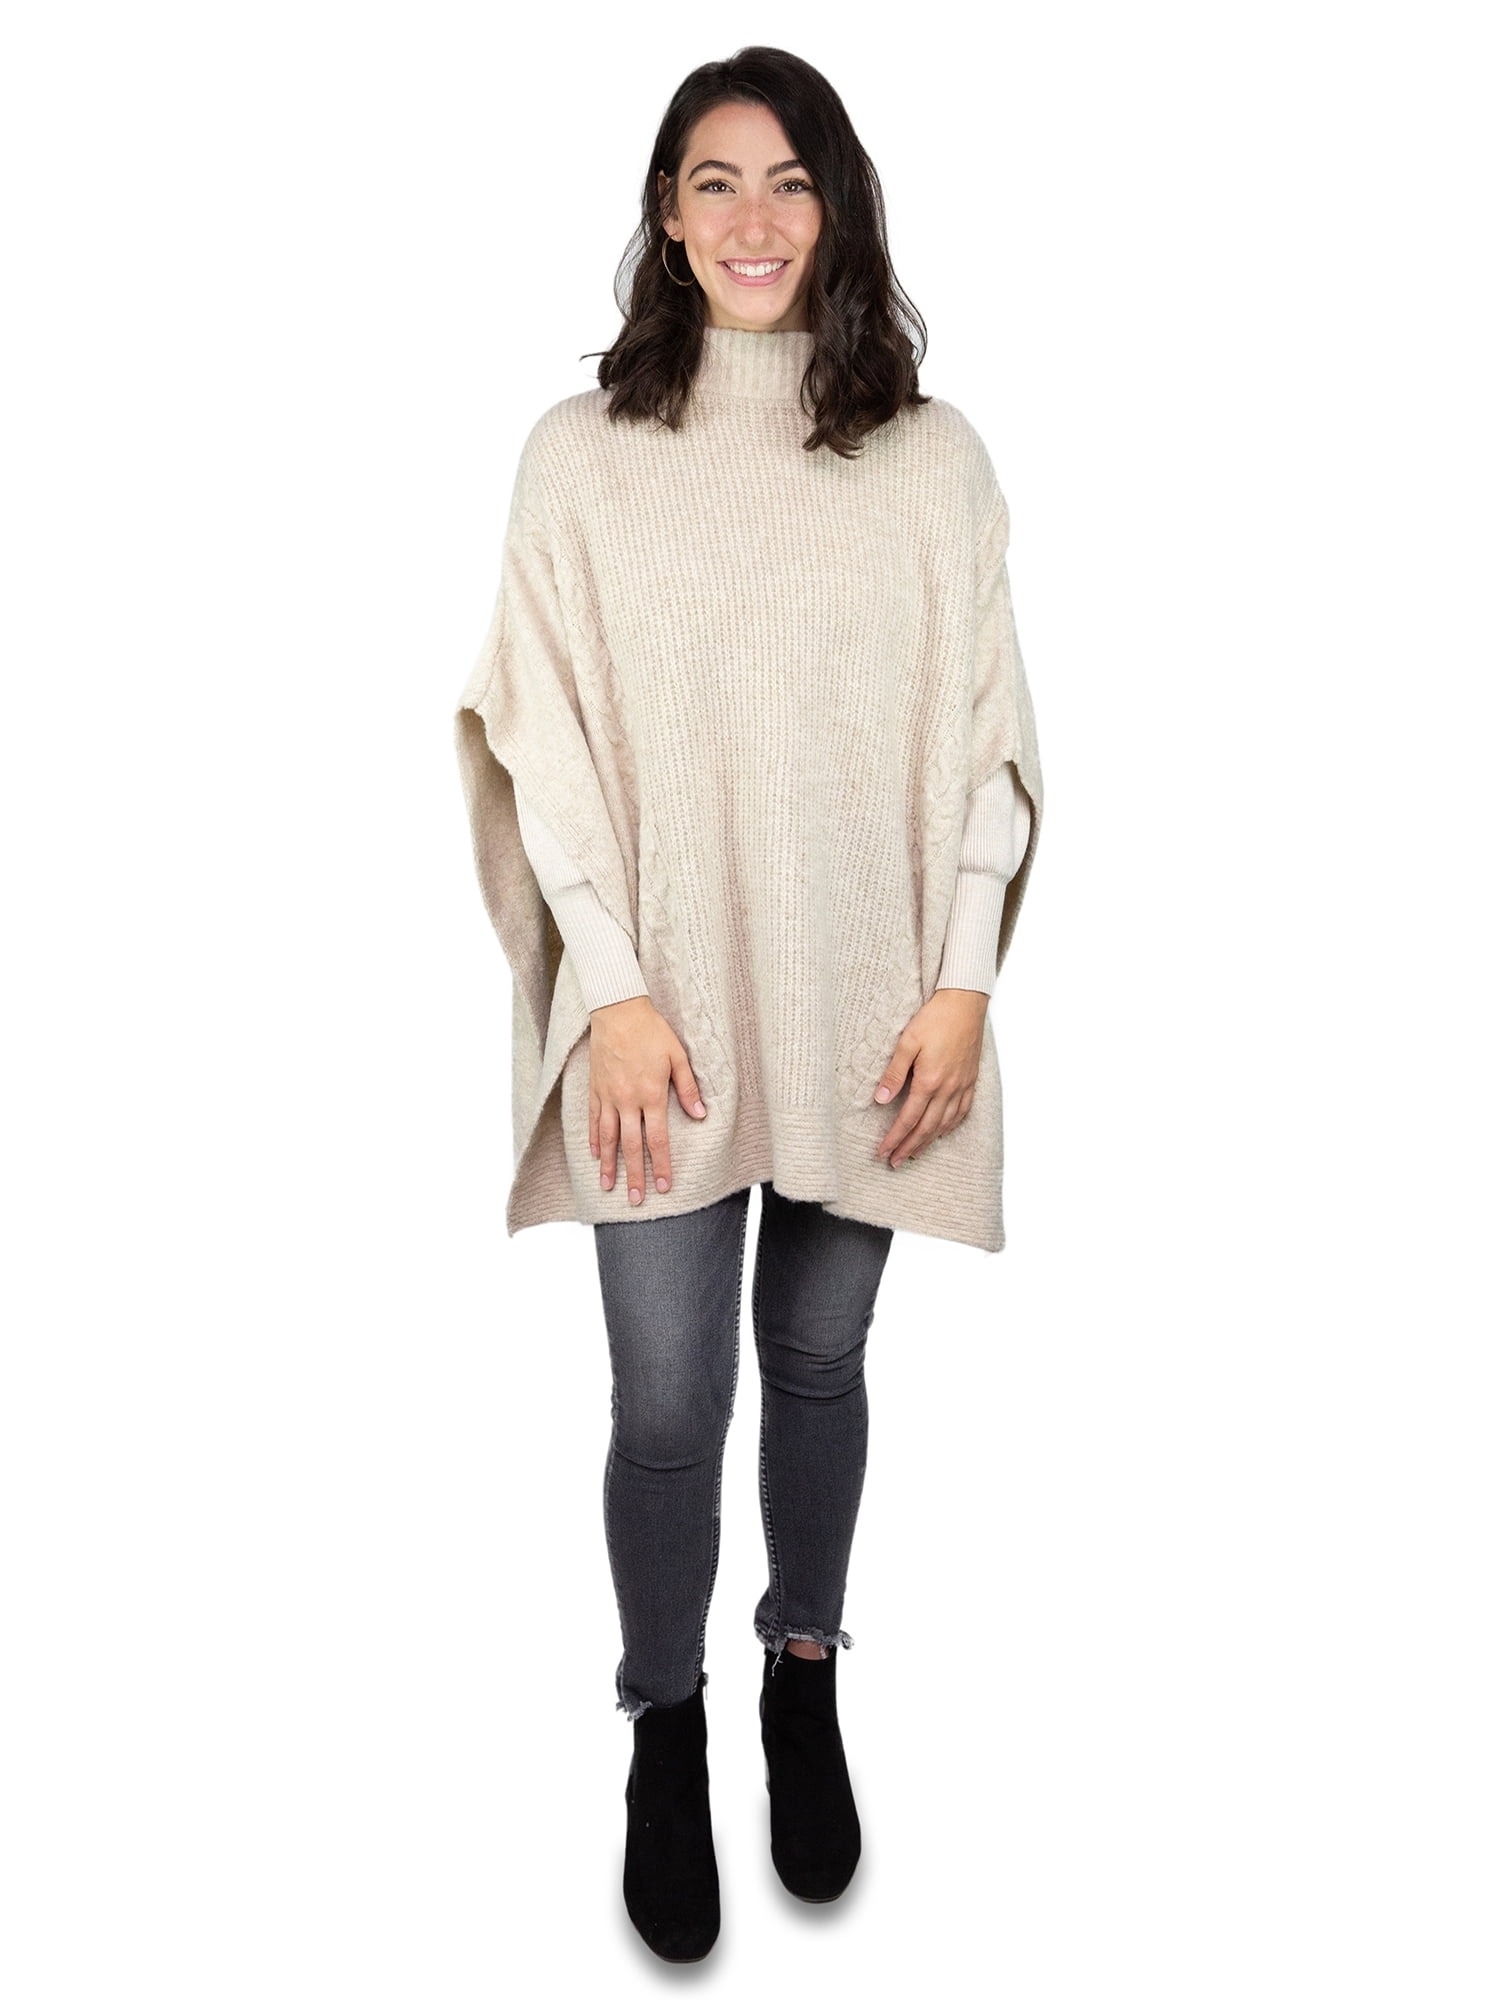 model in oversized cream colored, knit poncho, skinny jeans, and ankle boots